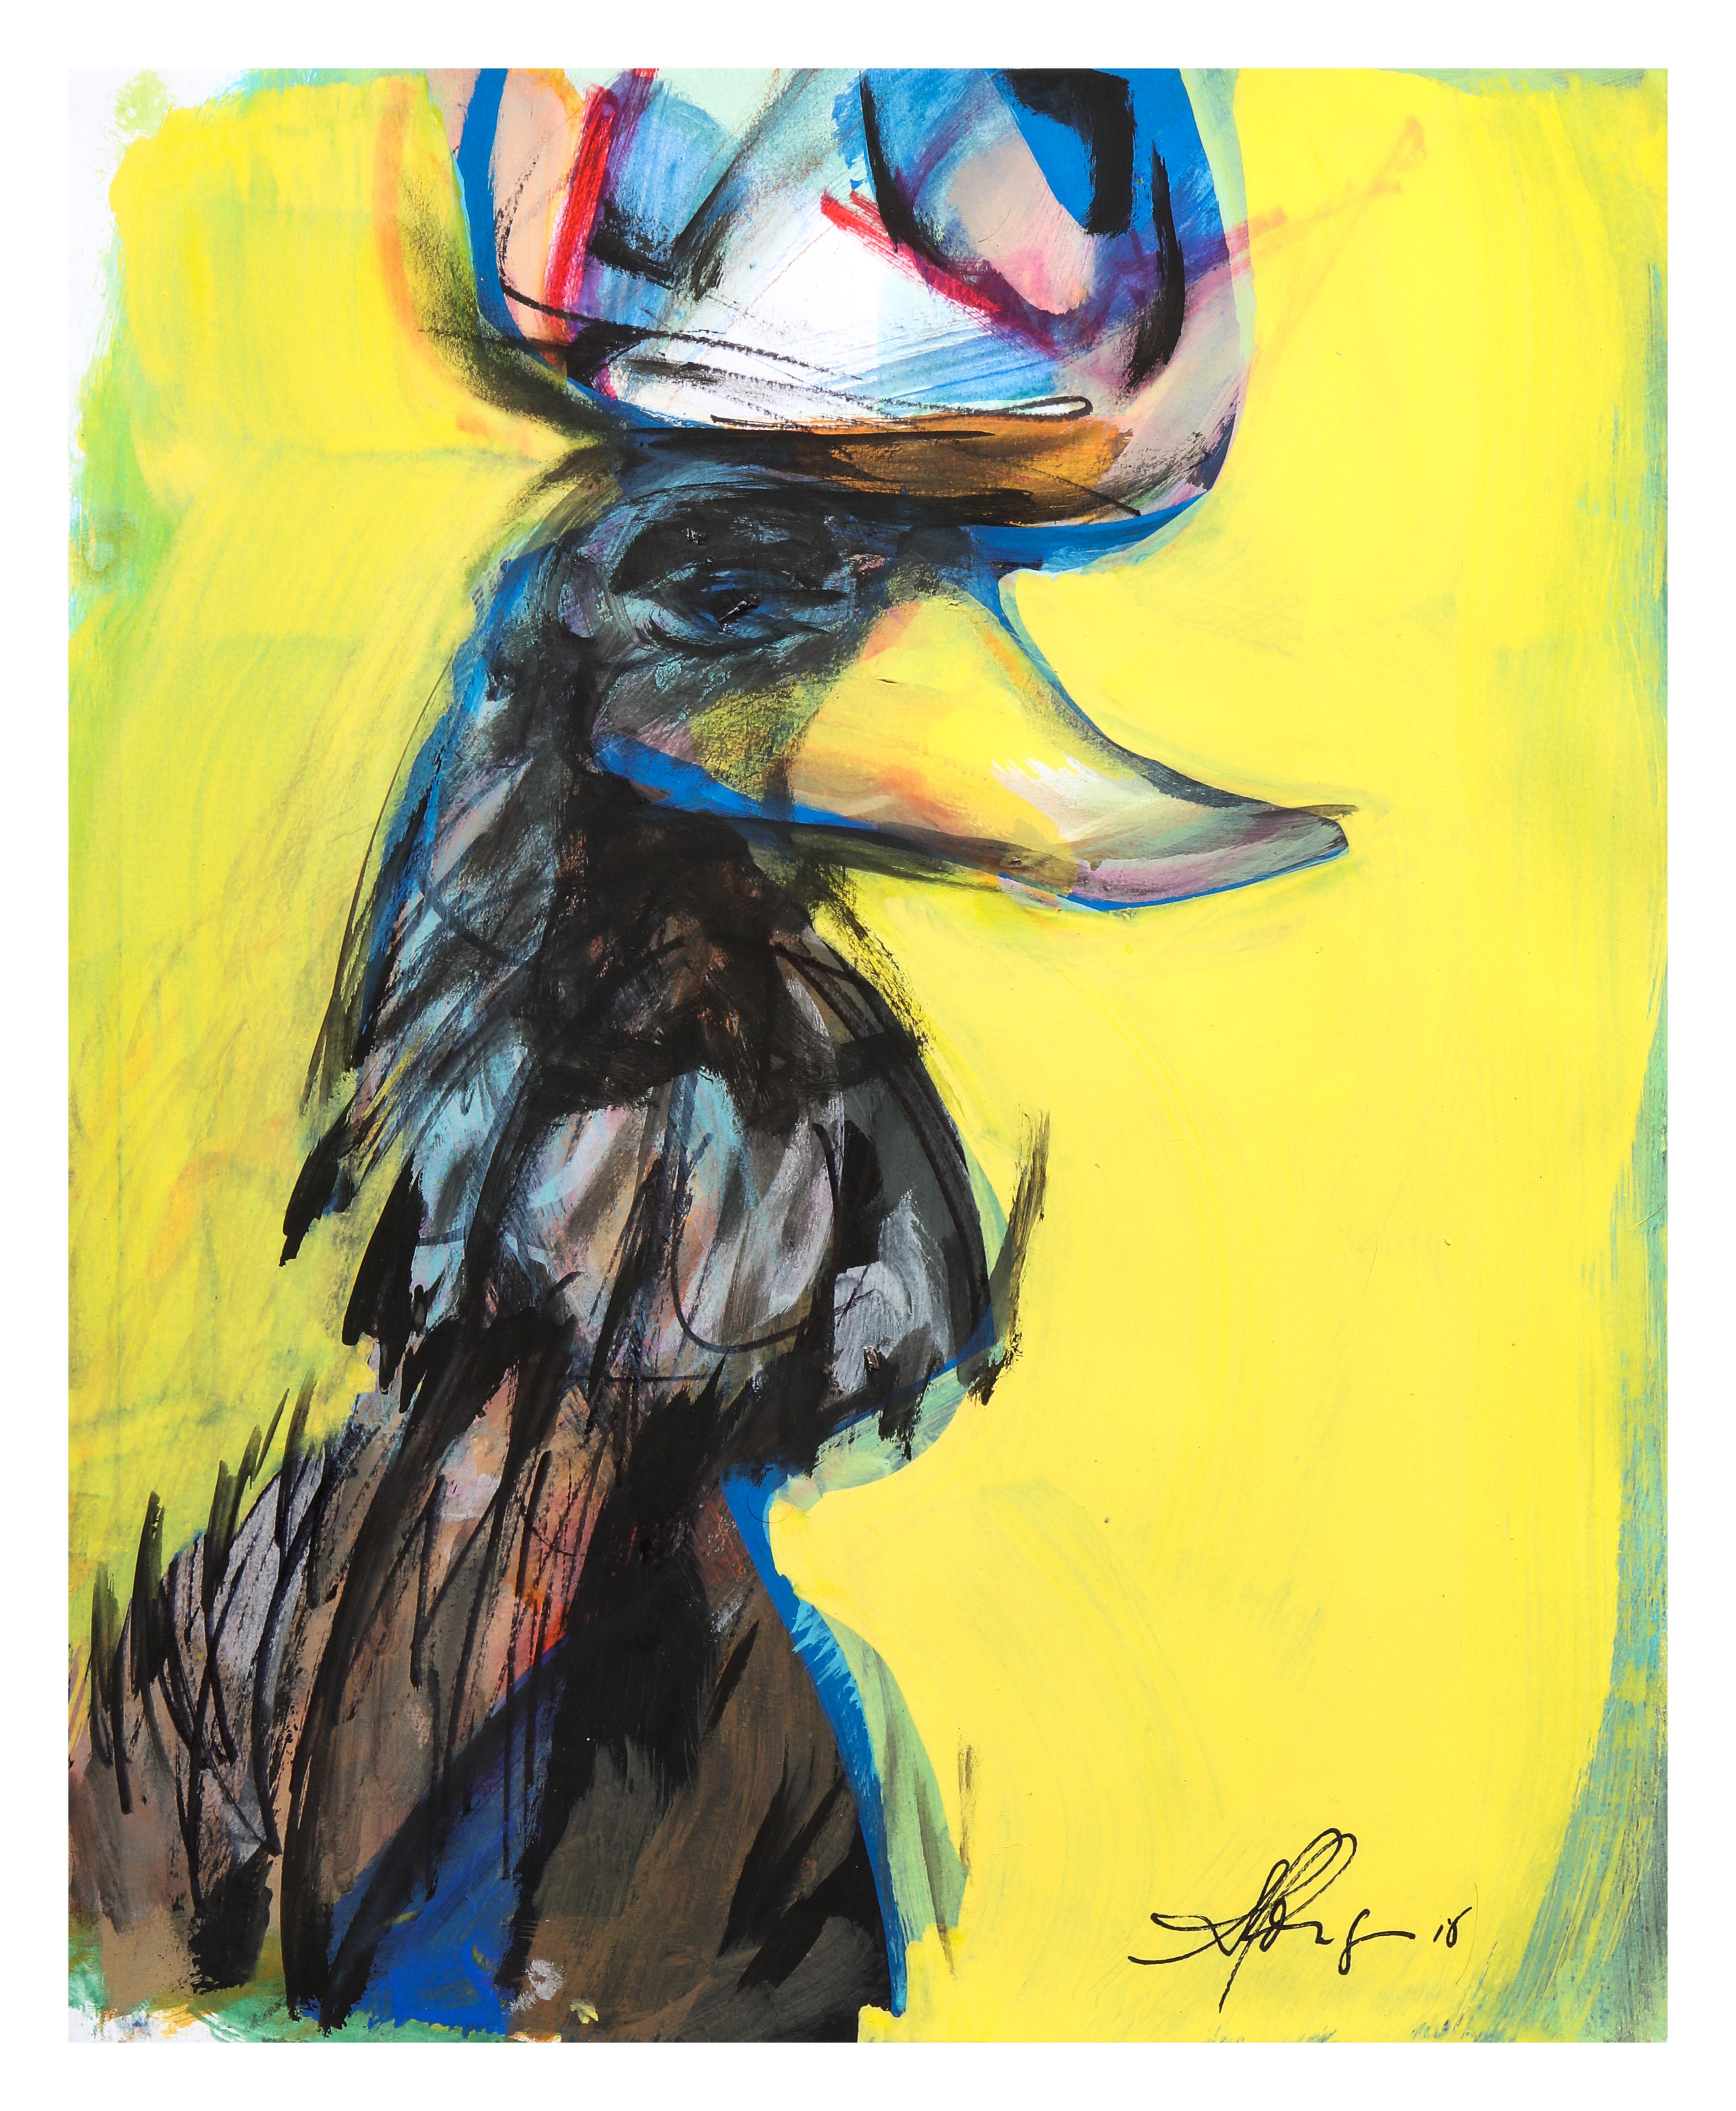 Painting of a rooster in an expressionist style, painted in dynamic colors and cubist lines. 
One of five paintings from Muñoz 'Rooster Collection'.
The Artist was influenced by Picasso and was under the tutelage of Roger Capron, his